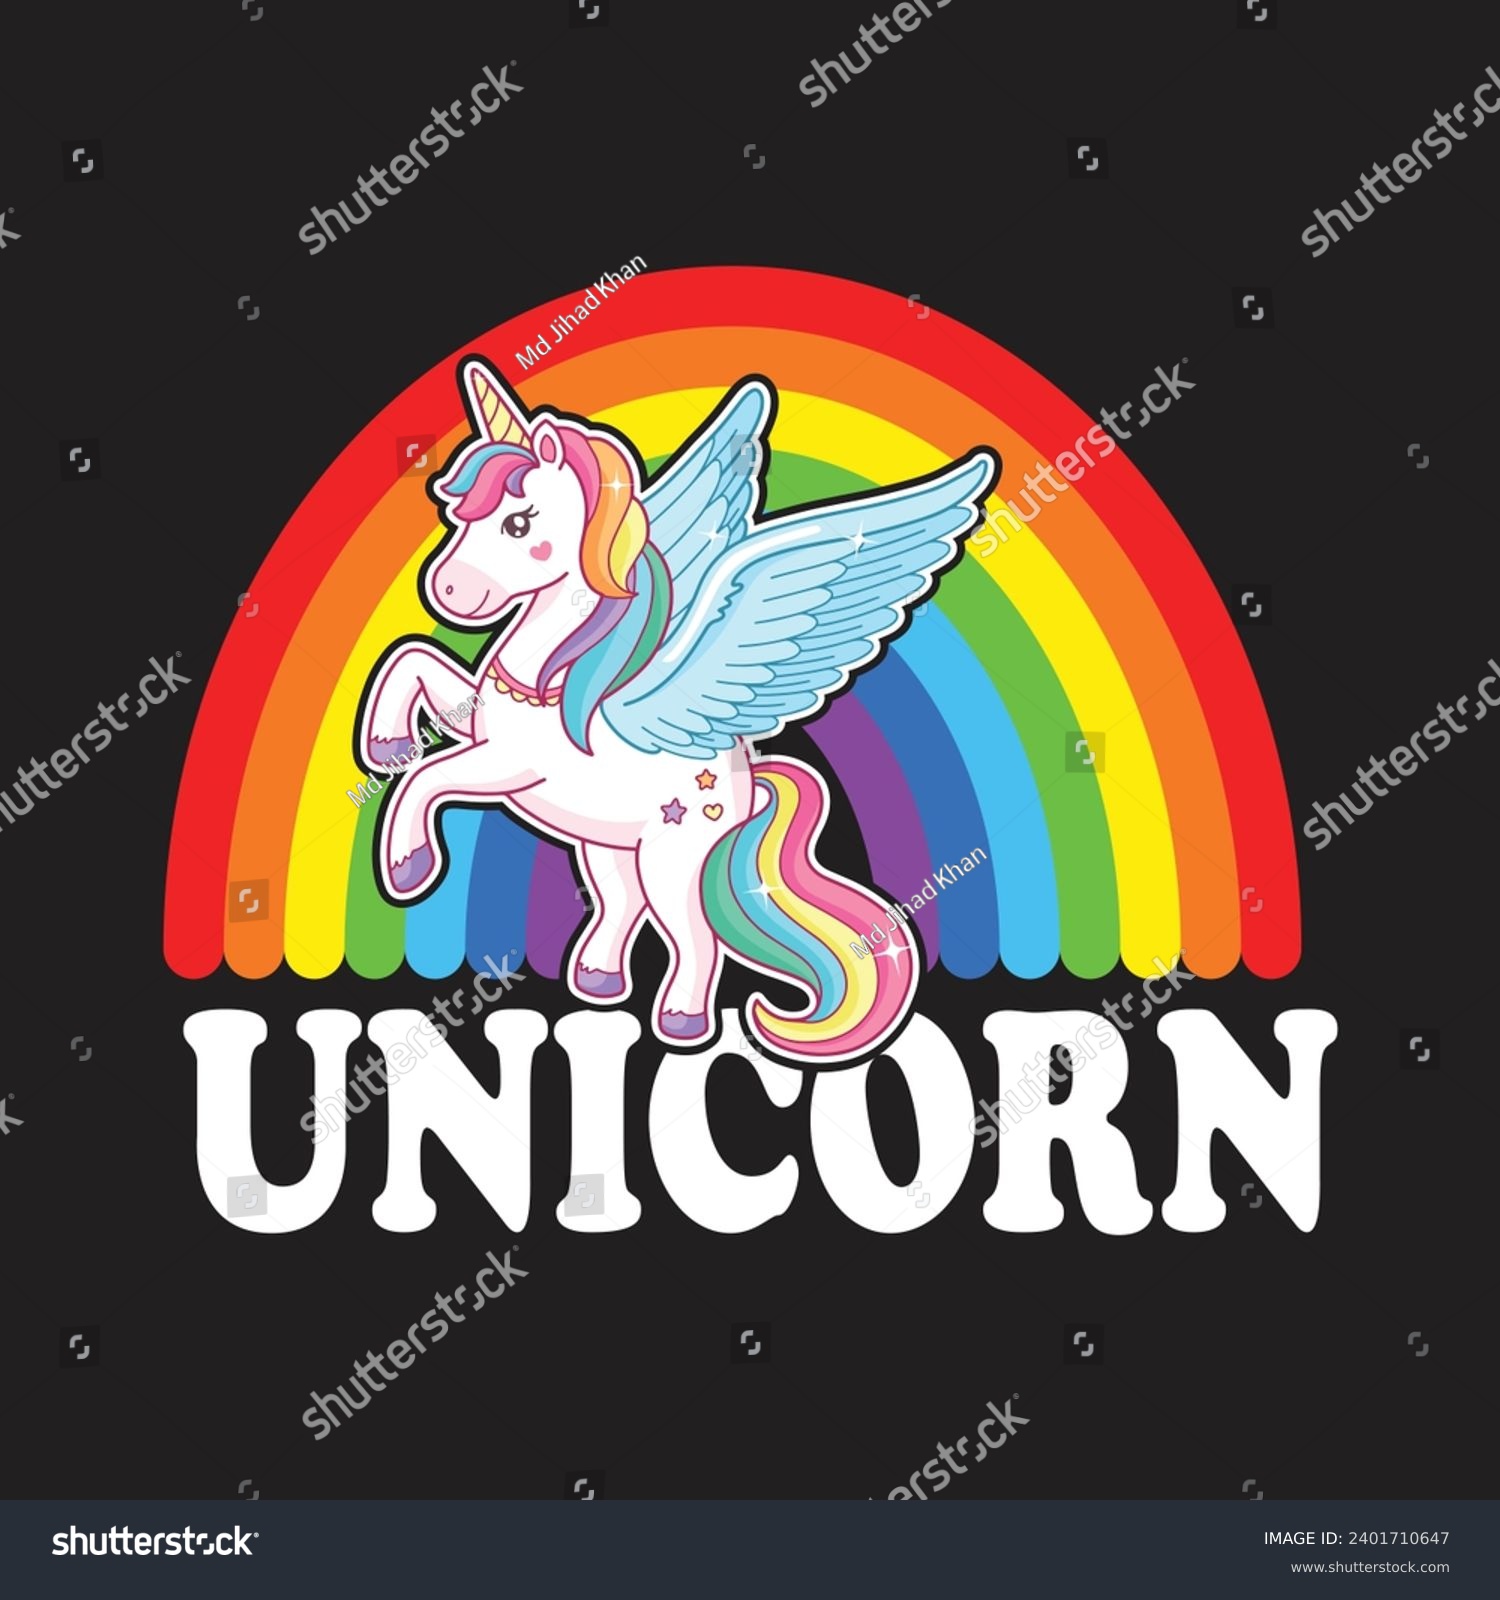 SVG of Unicorn Rainbow T-shirt design, Posters, Greeting Cards, Textiles, Sticker Vector Illustration, Hand drawn lettering for Xmas invitations, mugs, and gifts. svg